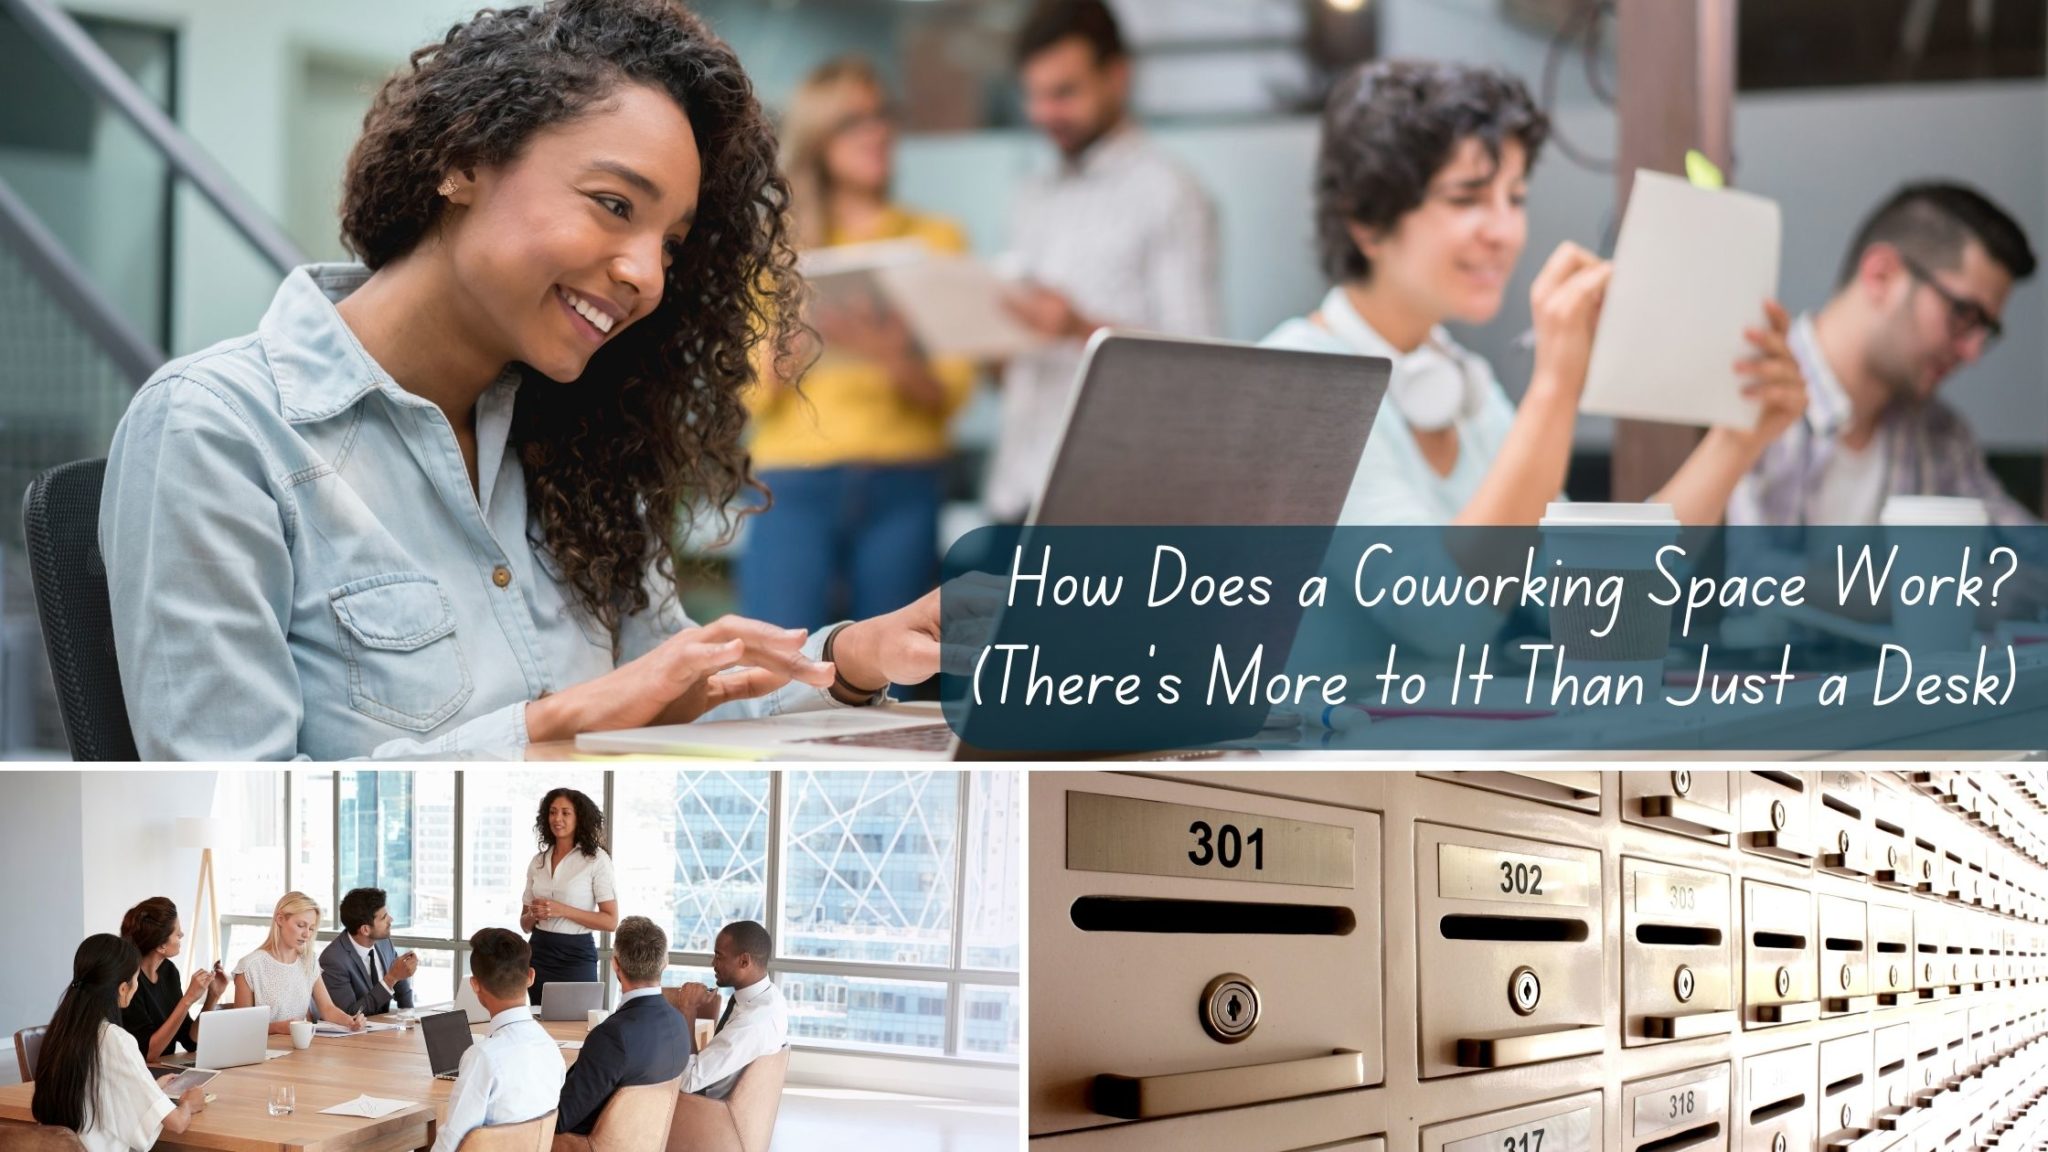 How Does a Coworking Space Work? (There’s More to It Than Just a Desk)